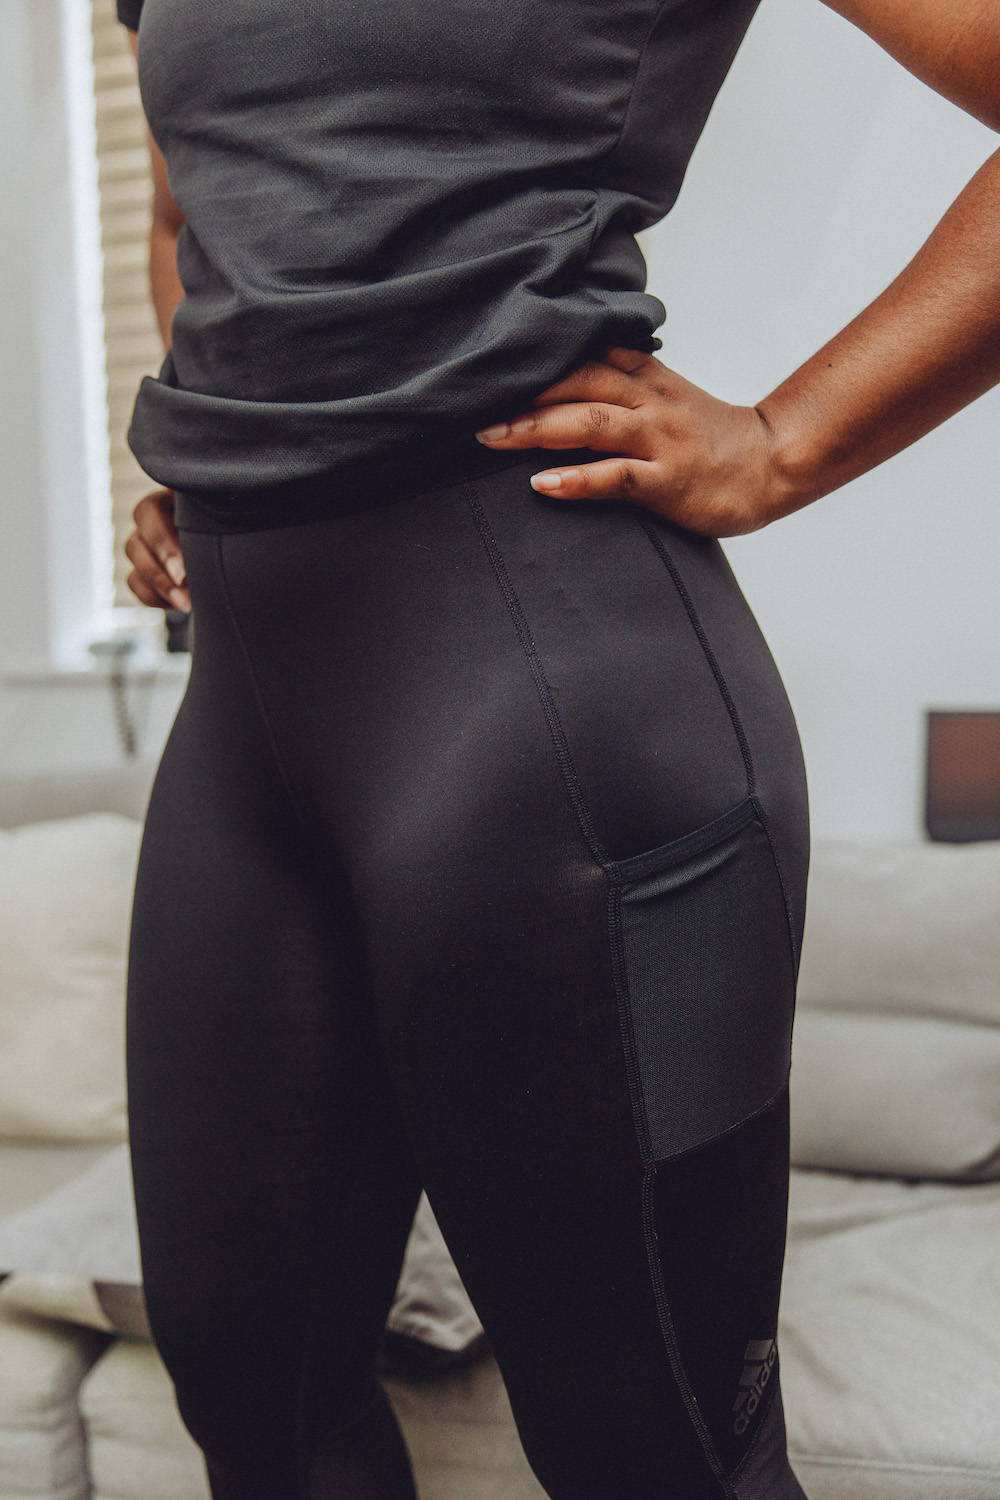 Amazon.com: LUMANA Leakproof Womens Leggings: Bladder Control Athletic  Bottoms - Leggings with Pockets Designed with Built-in Bladder Leakage Pads  for Women (Black, XS) : Clothing, Shoes & Jewelry